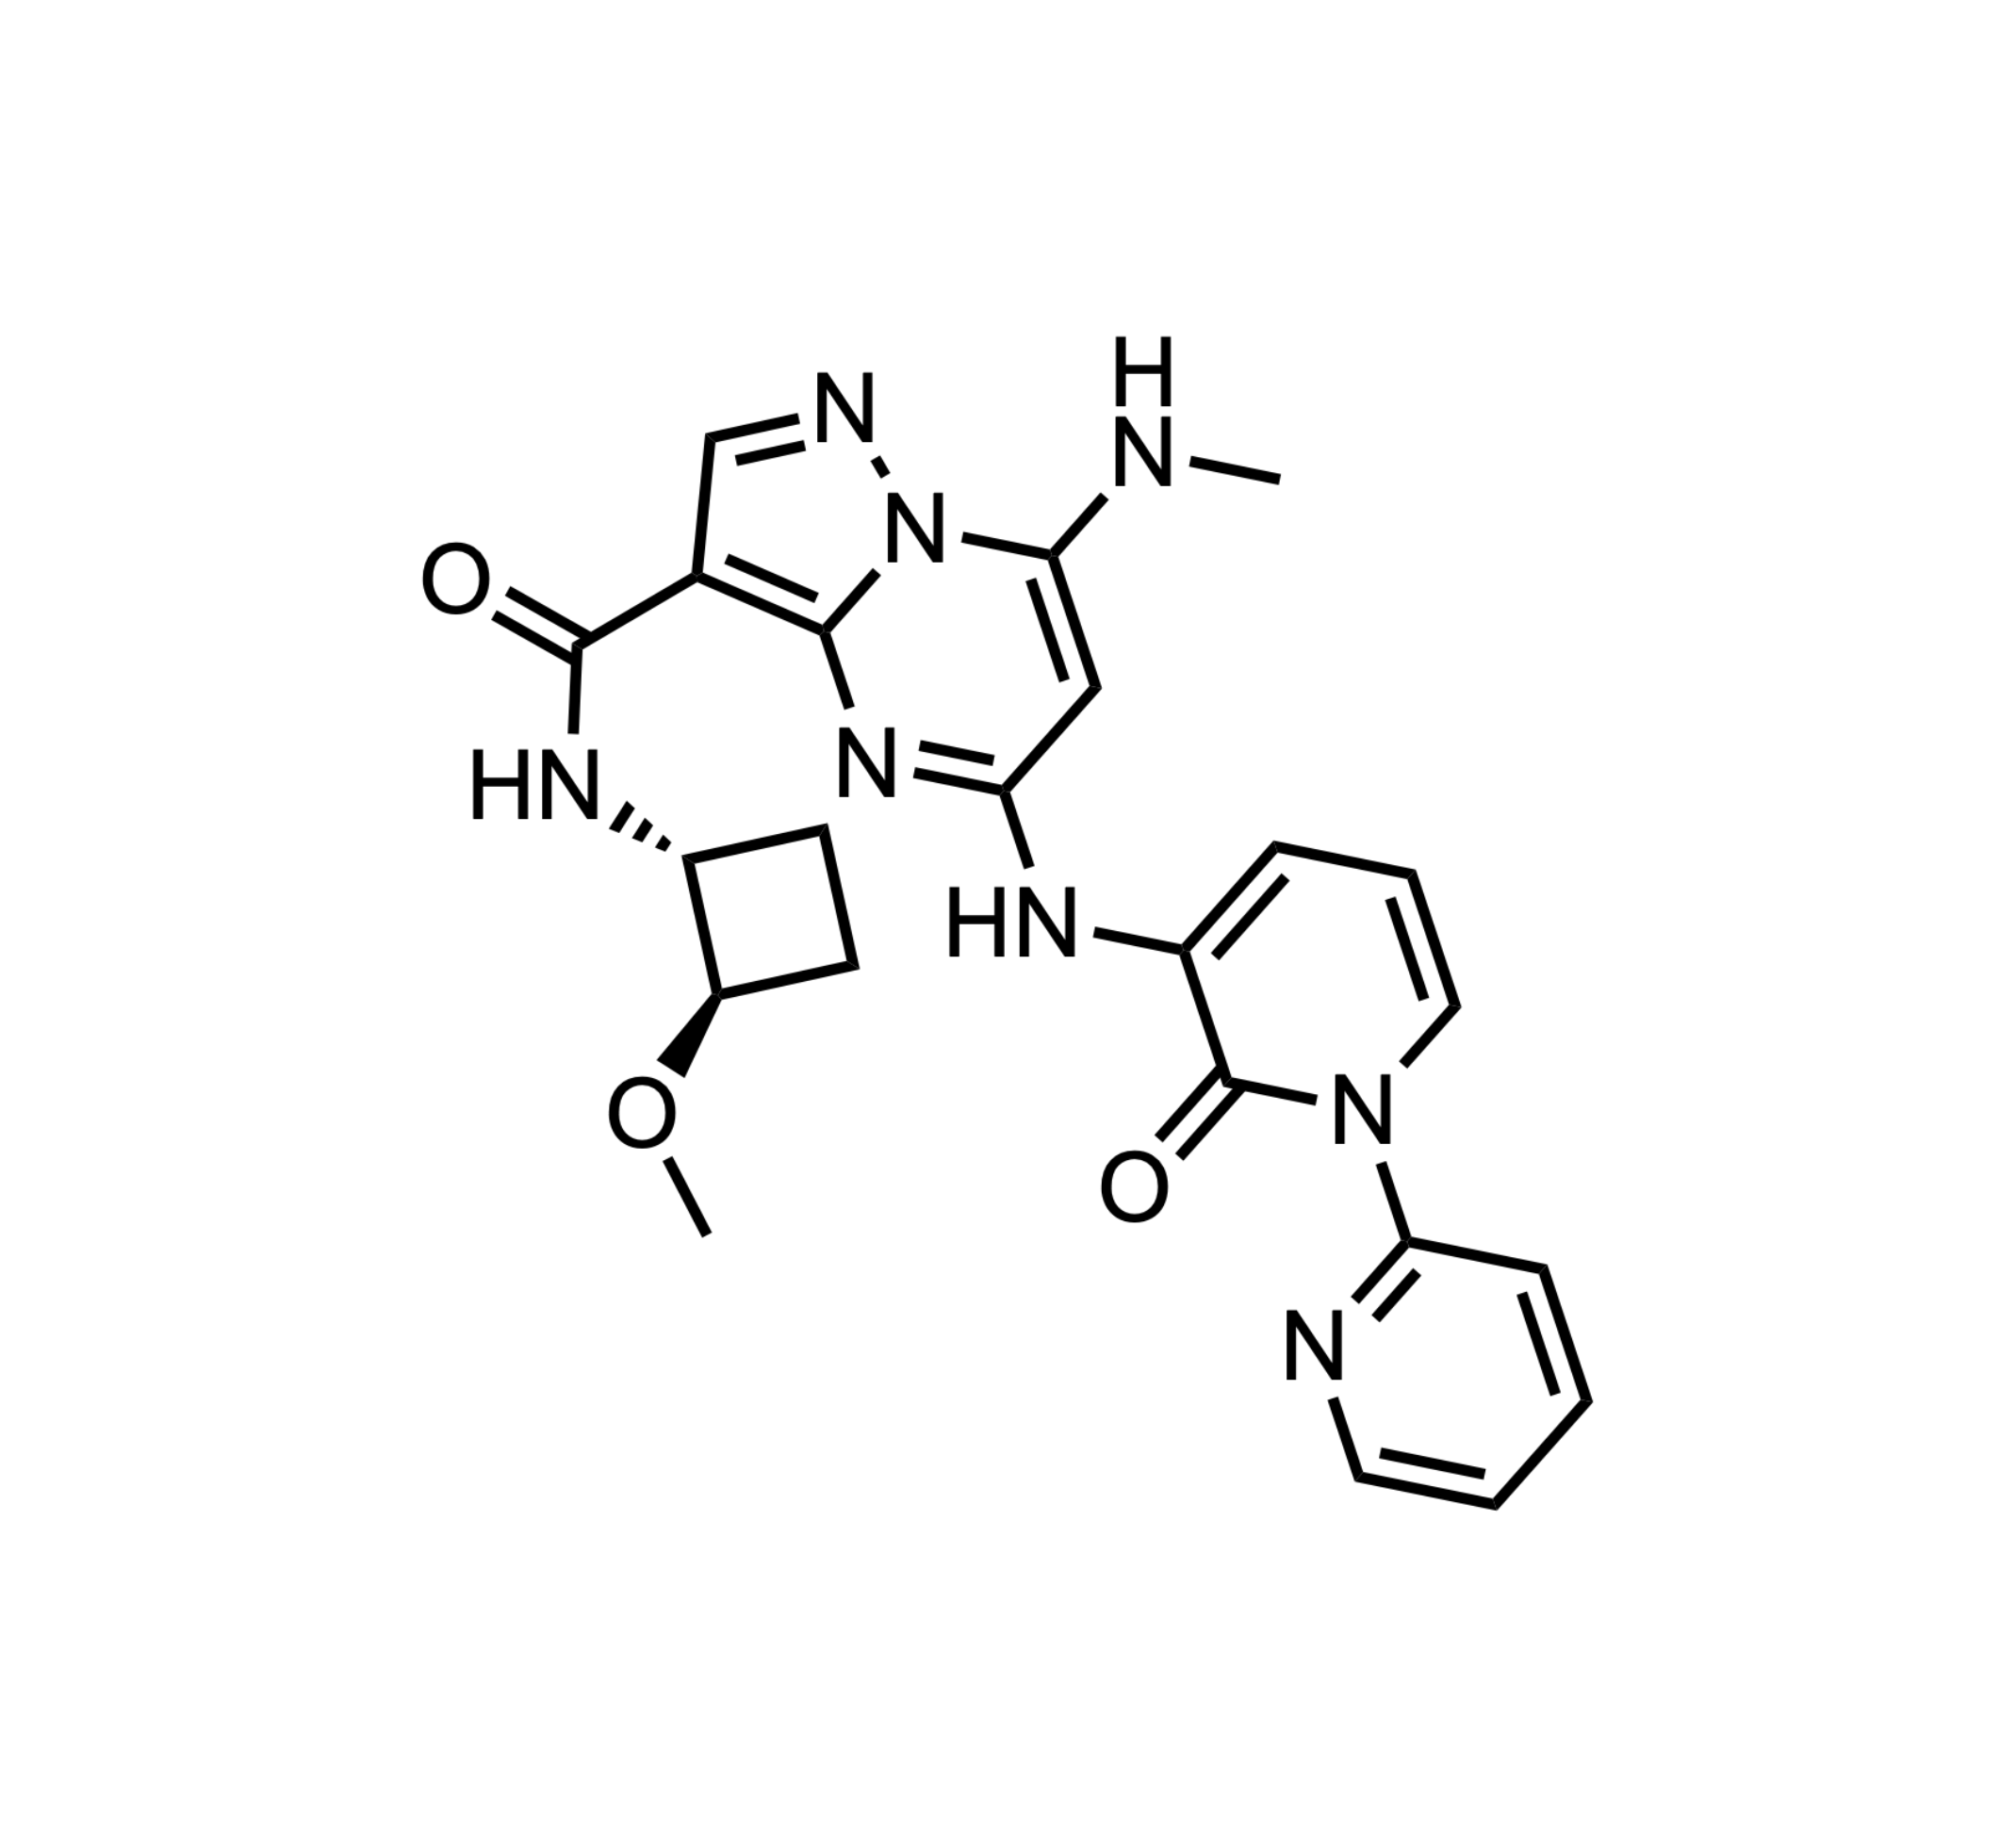 TAK-279, oral, once-daily, allosteric TYK2 inhibitor, Ph. IIb for moderate-to-severe plaque psoriasis, FEP+-supported core hopping + VLS w/ TYK2-JH2 Xtal structure, Press release, March 18, 2023, NIMBUS THERAPEUTICS, MA / TAKEDA, JP